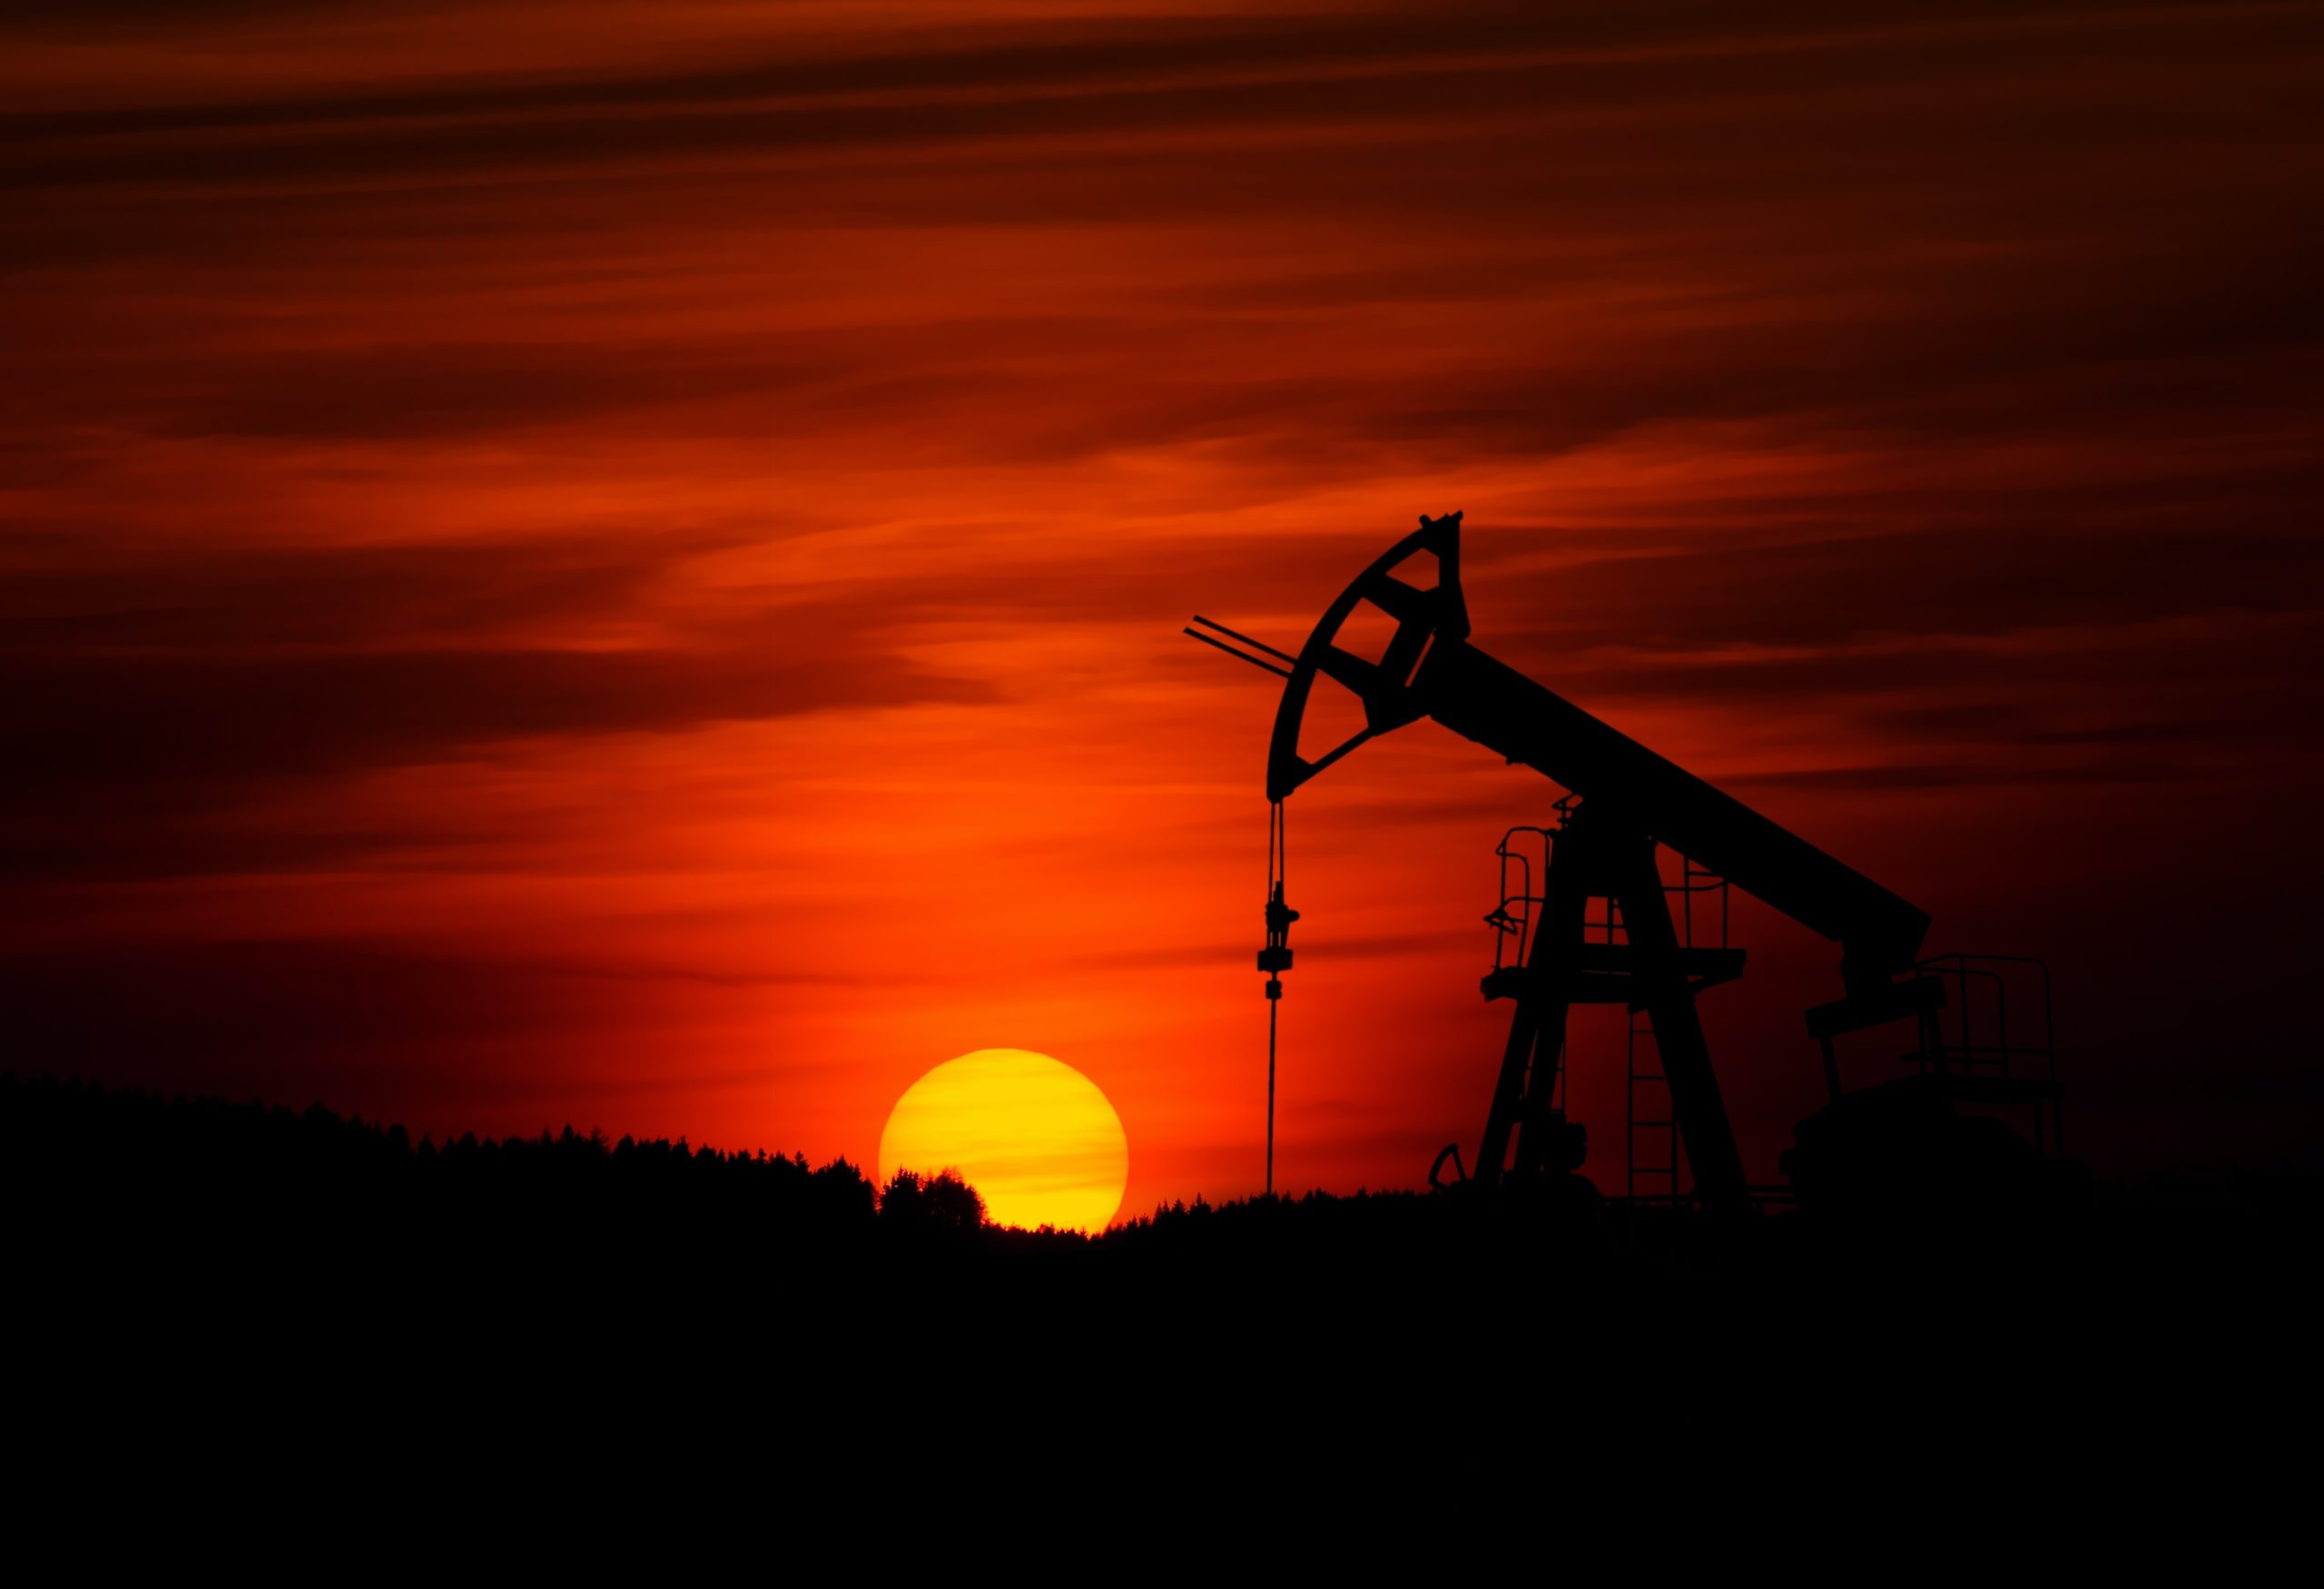 Moster Law Firm, Oil, Gas, Petroleum, Pumpjack, Oil Industry, Gas Industry, Industry, Energy, Fossil Fuels, Texas